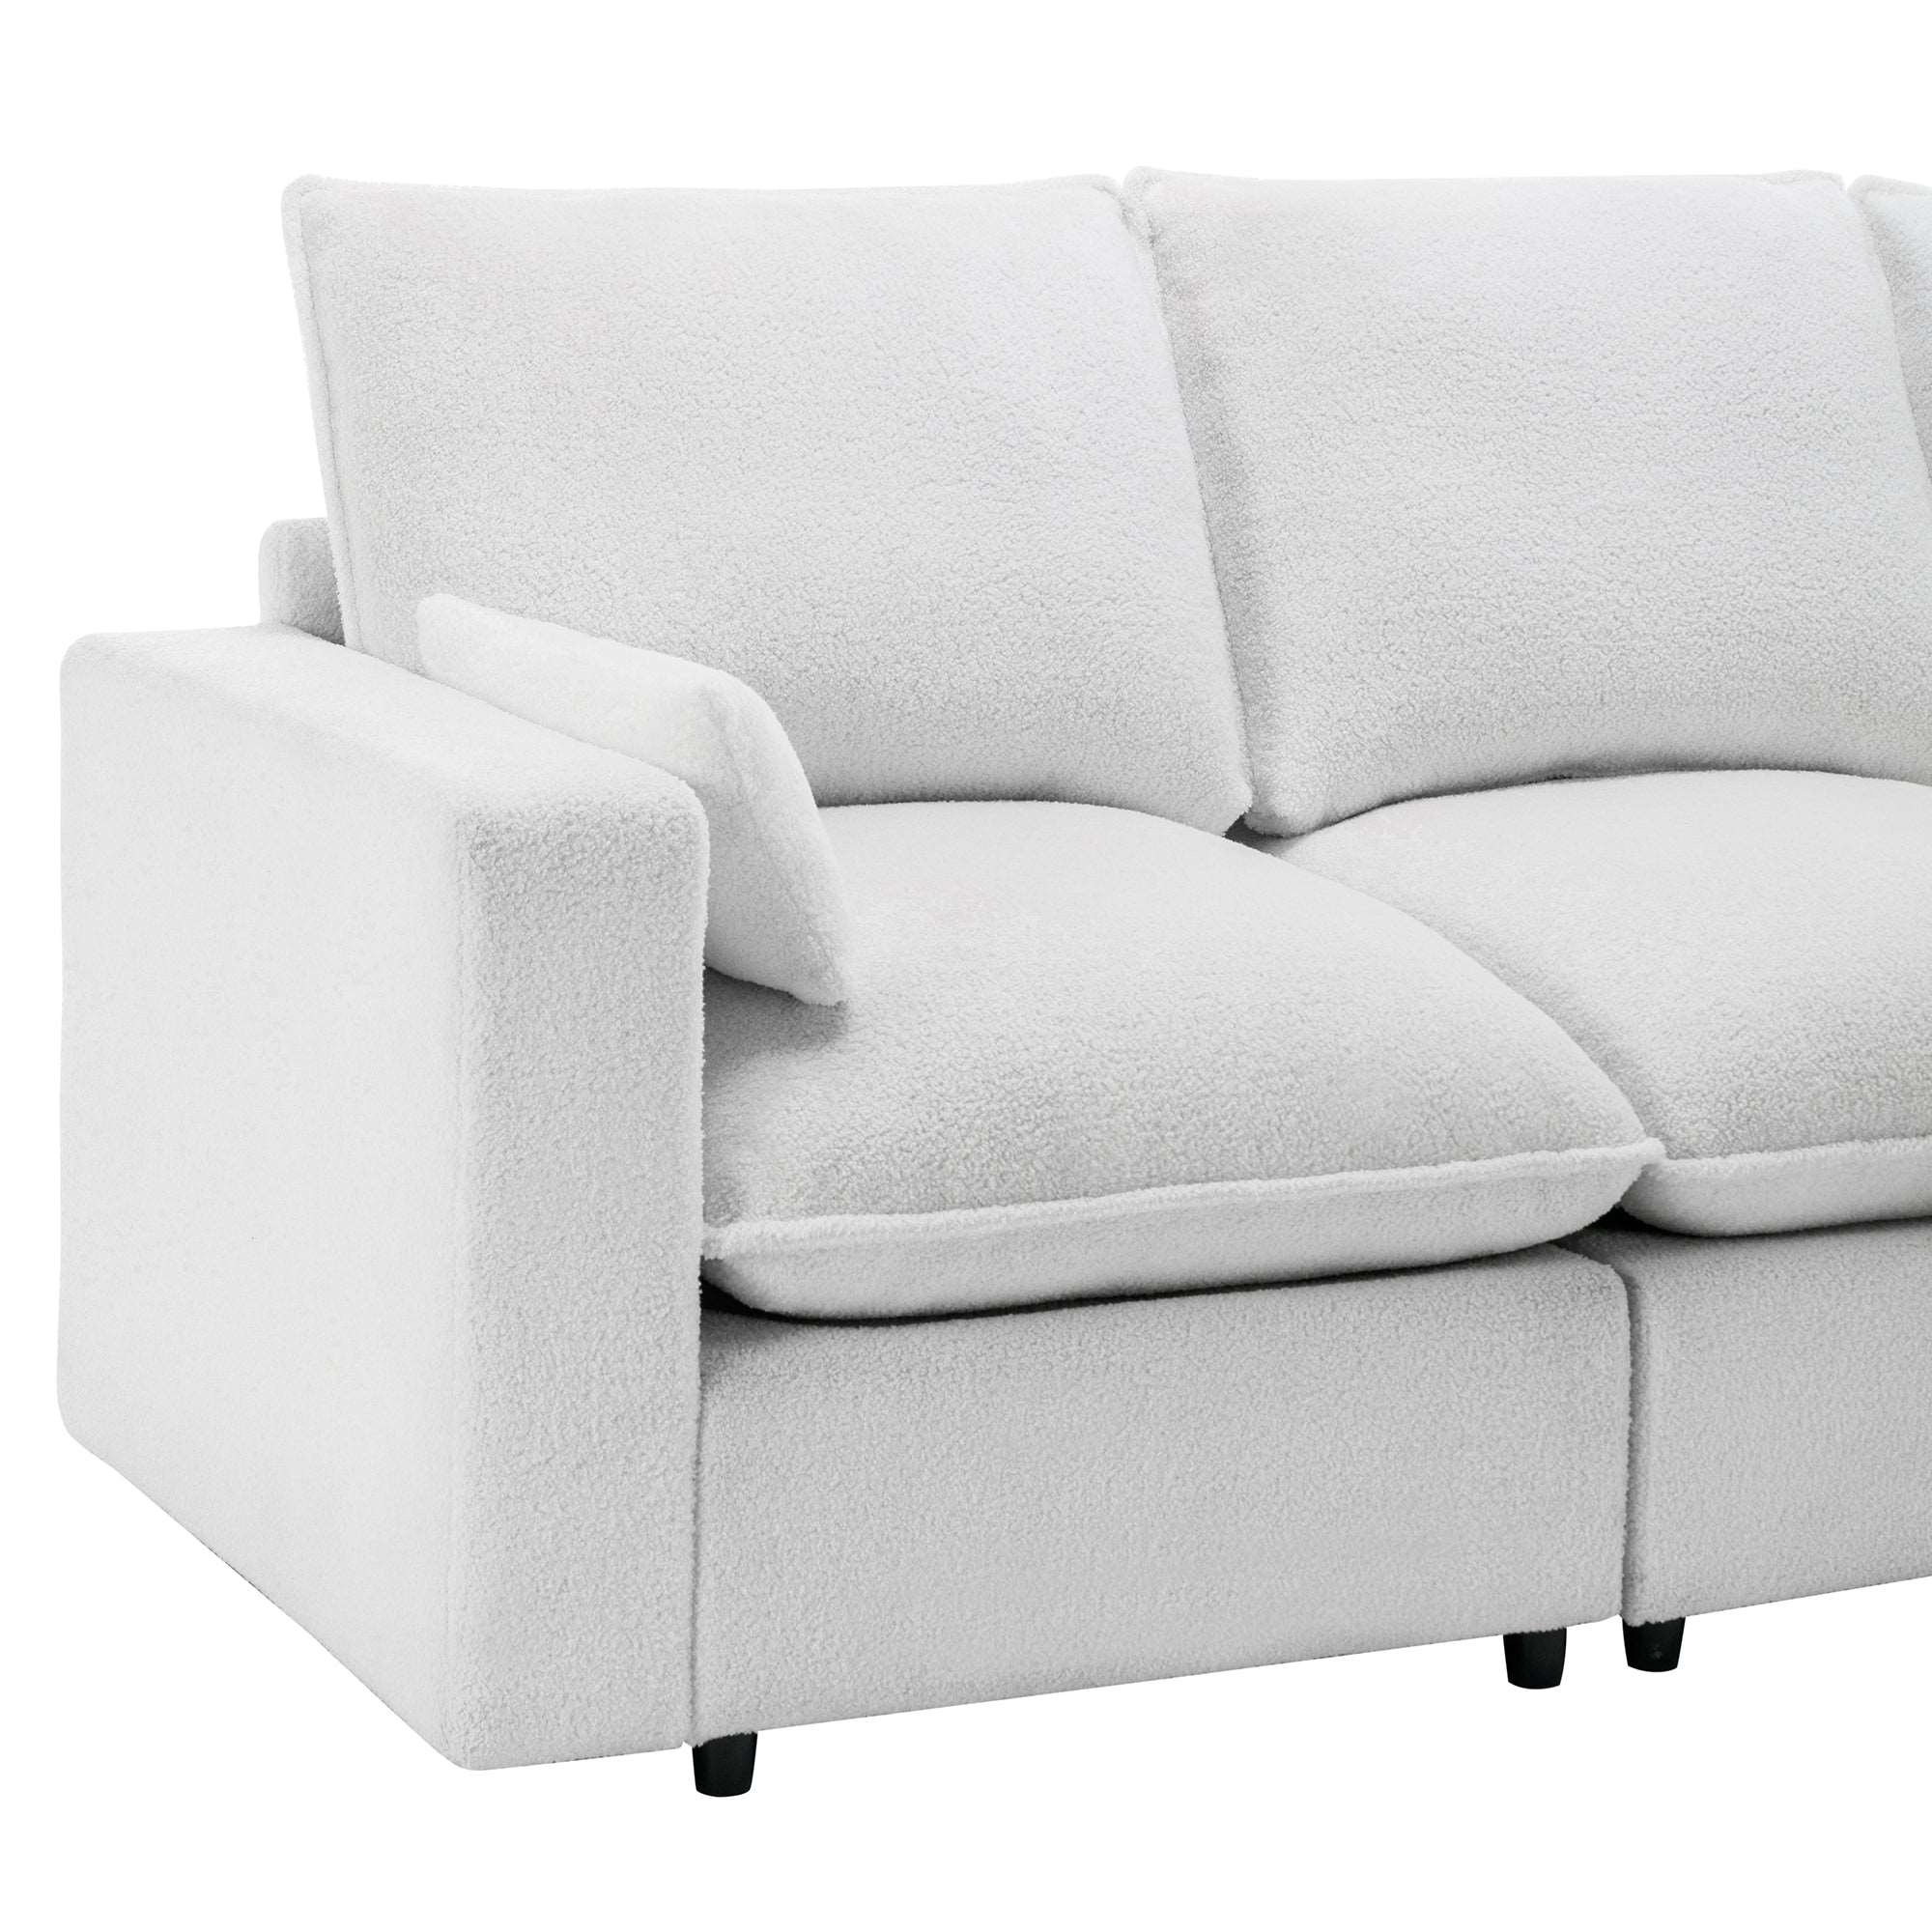 Bellemave 87.7" Teddy Fabric 3 Seat Sofa with Removable Back and Seat Cushions and 2 pillows